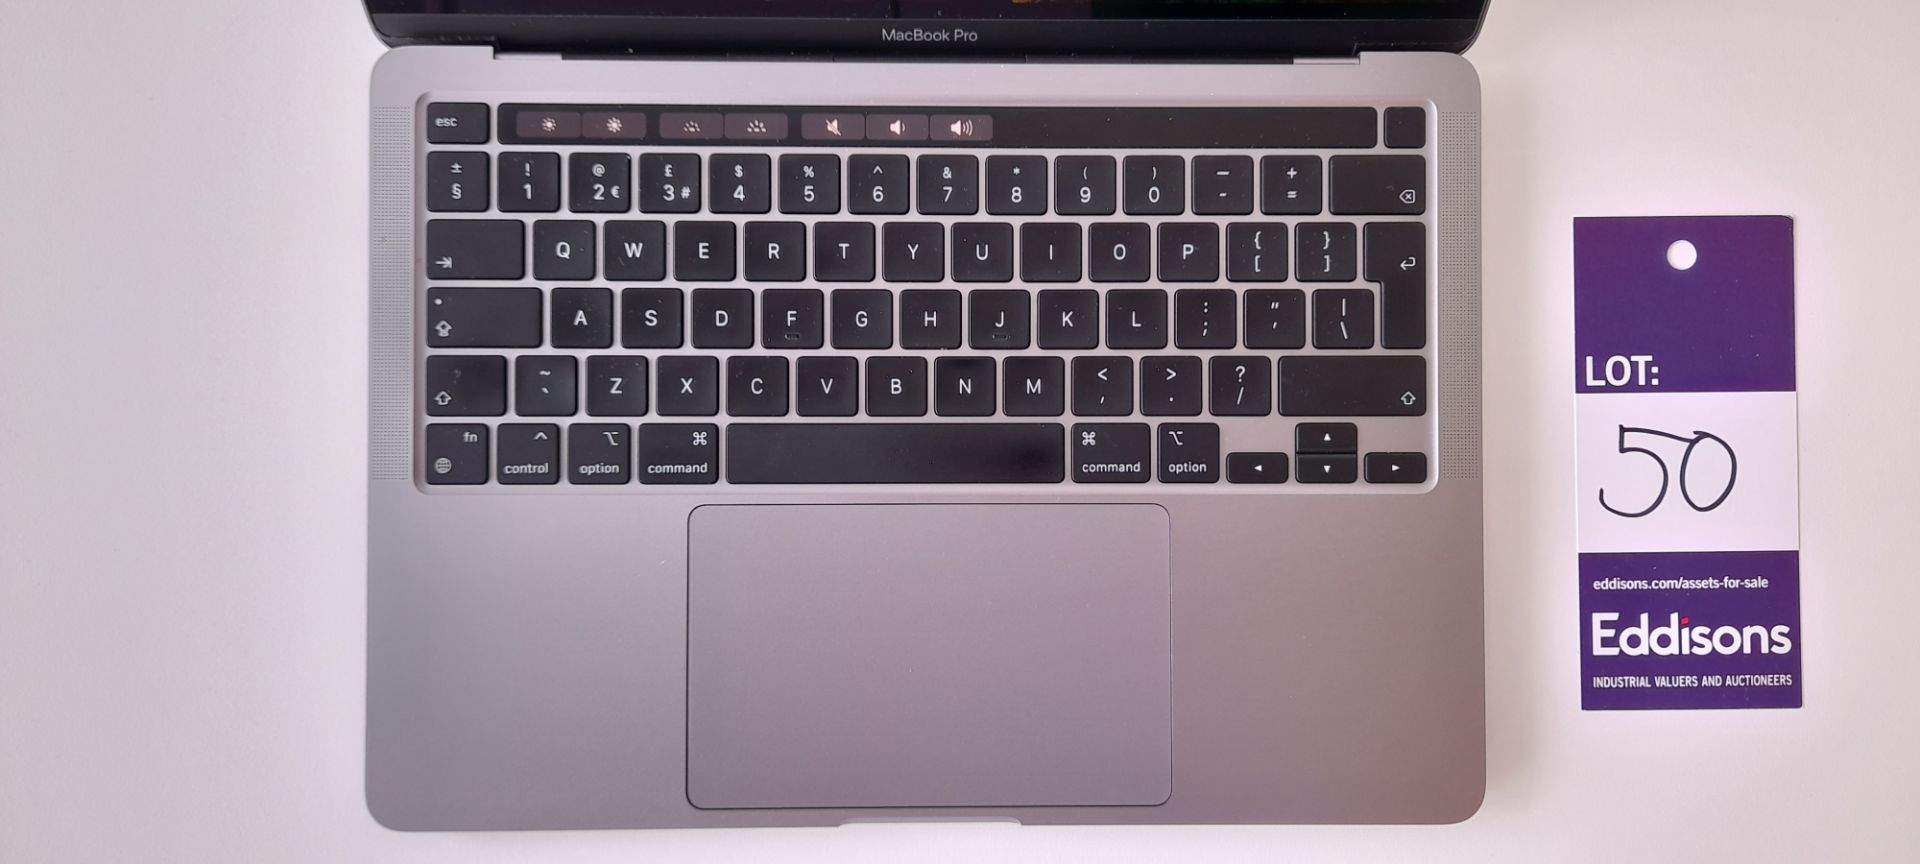 Apple MacBook Pro Model A2338 EMC3578. S/N FVFGXTD4Q05. Collection from Canary Wharf, London, E14 - Image 3 of 7